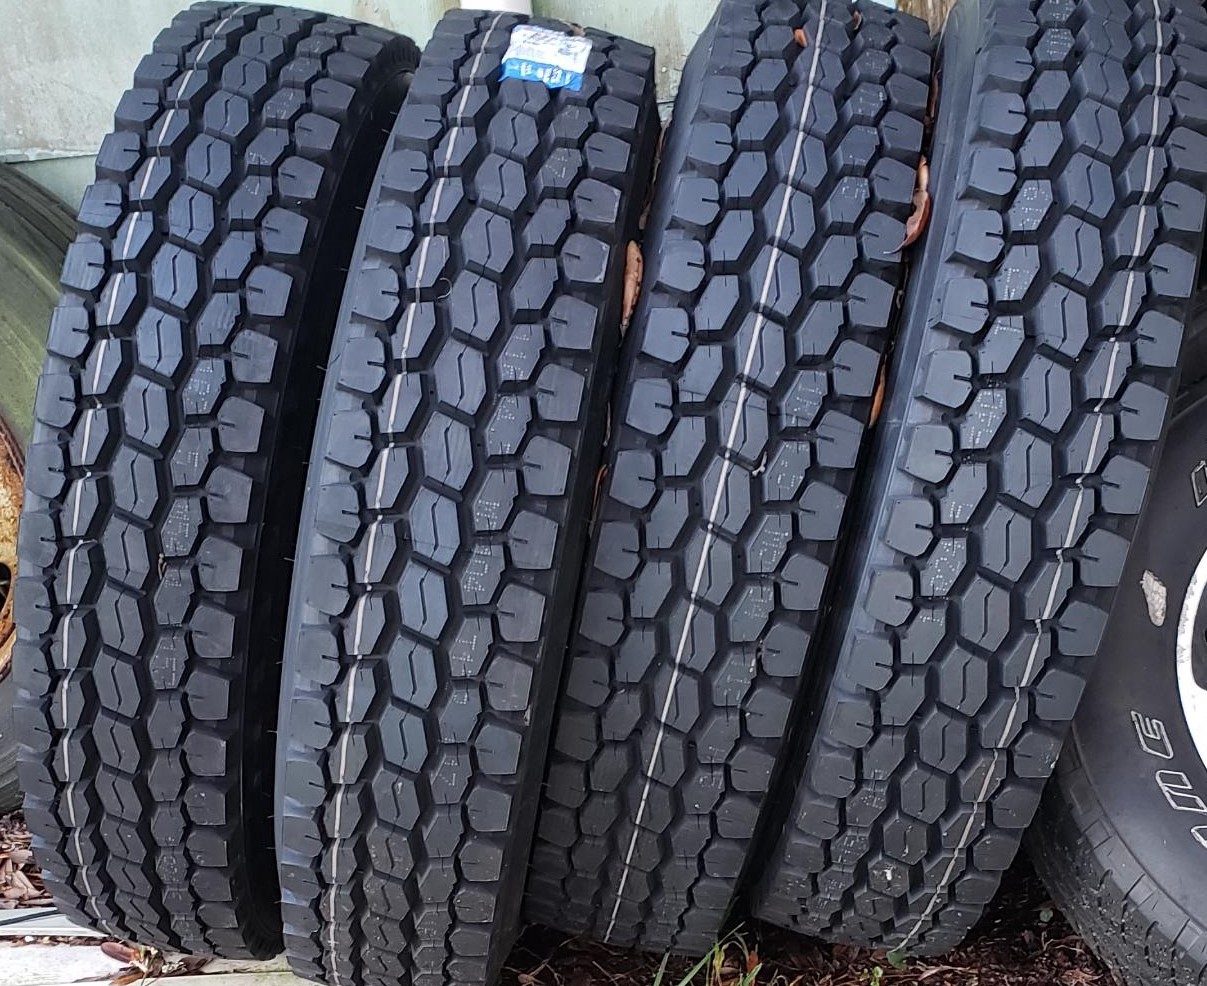 Octagon Tire- Commercial Tires Semi-Truck Parts reviews | 3947 Excelsior Blvd - Minneapolis MN